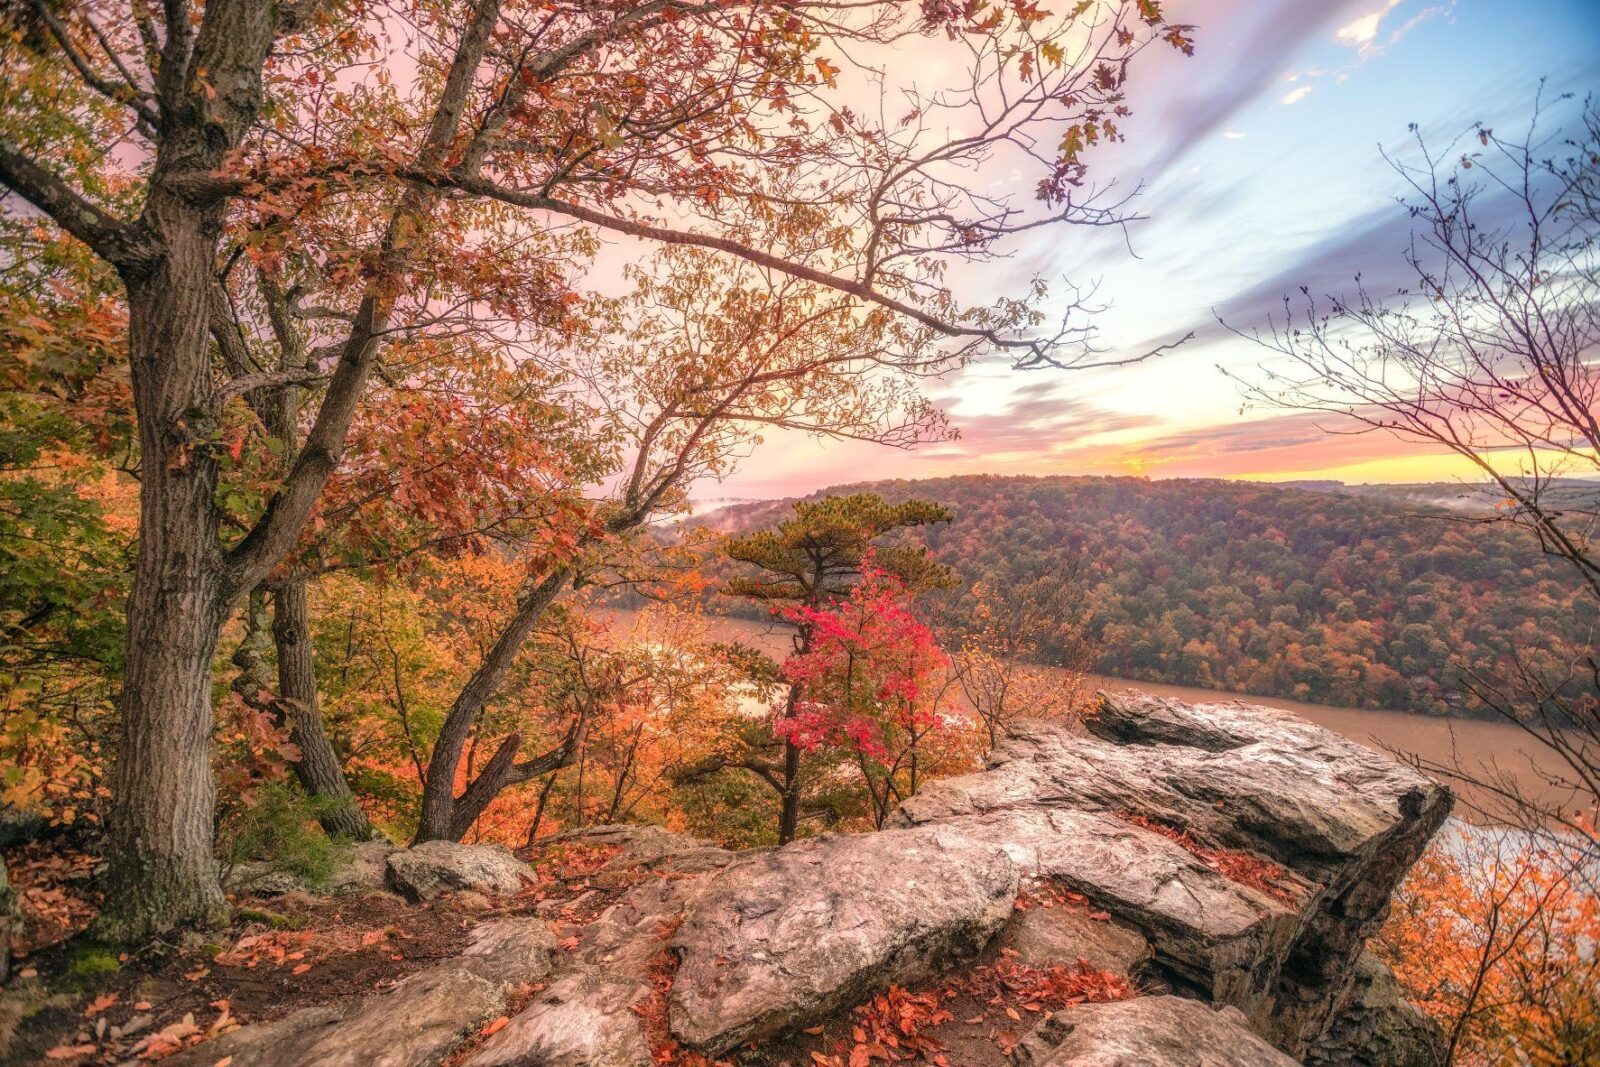 One of many fall activities Pinnacle Overlook Rocks Tom Roe Photography @DiscoverLancaster